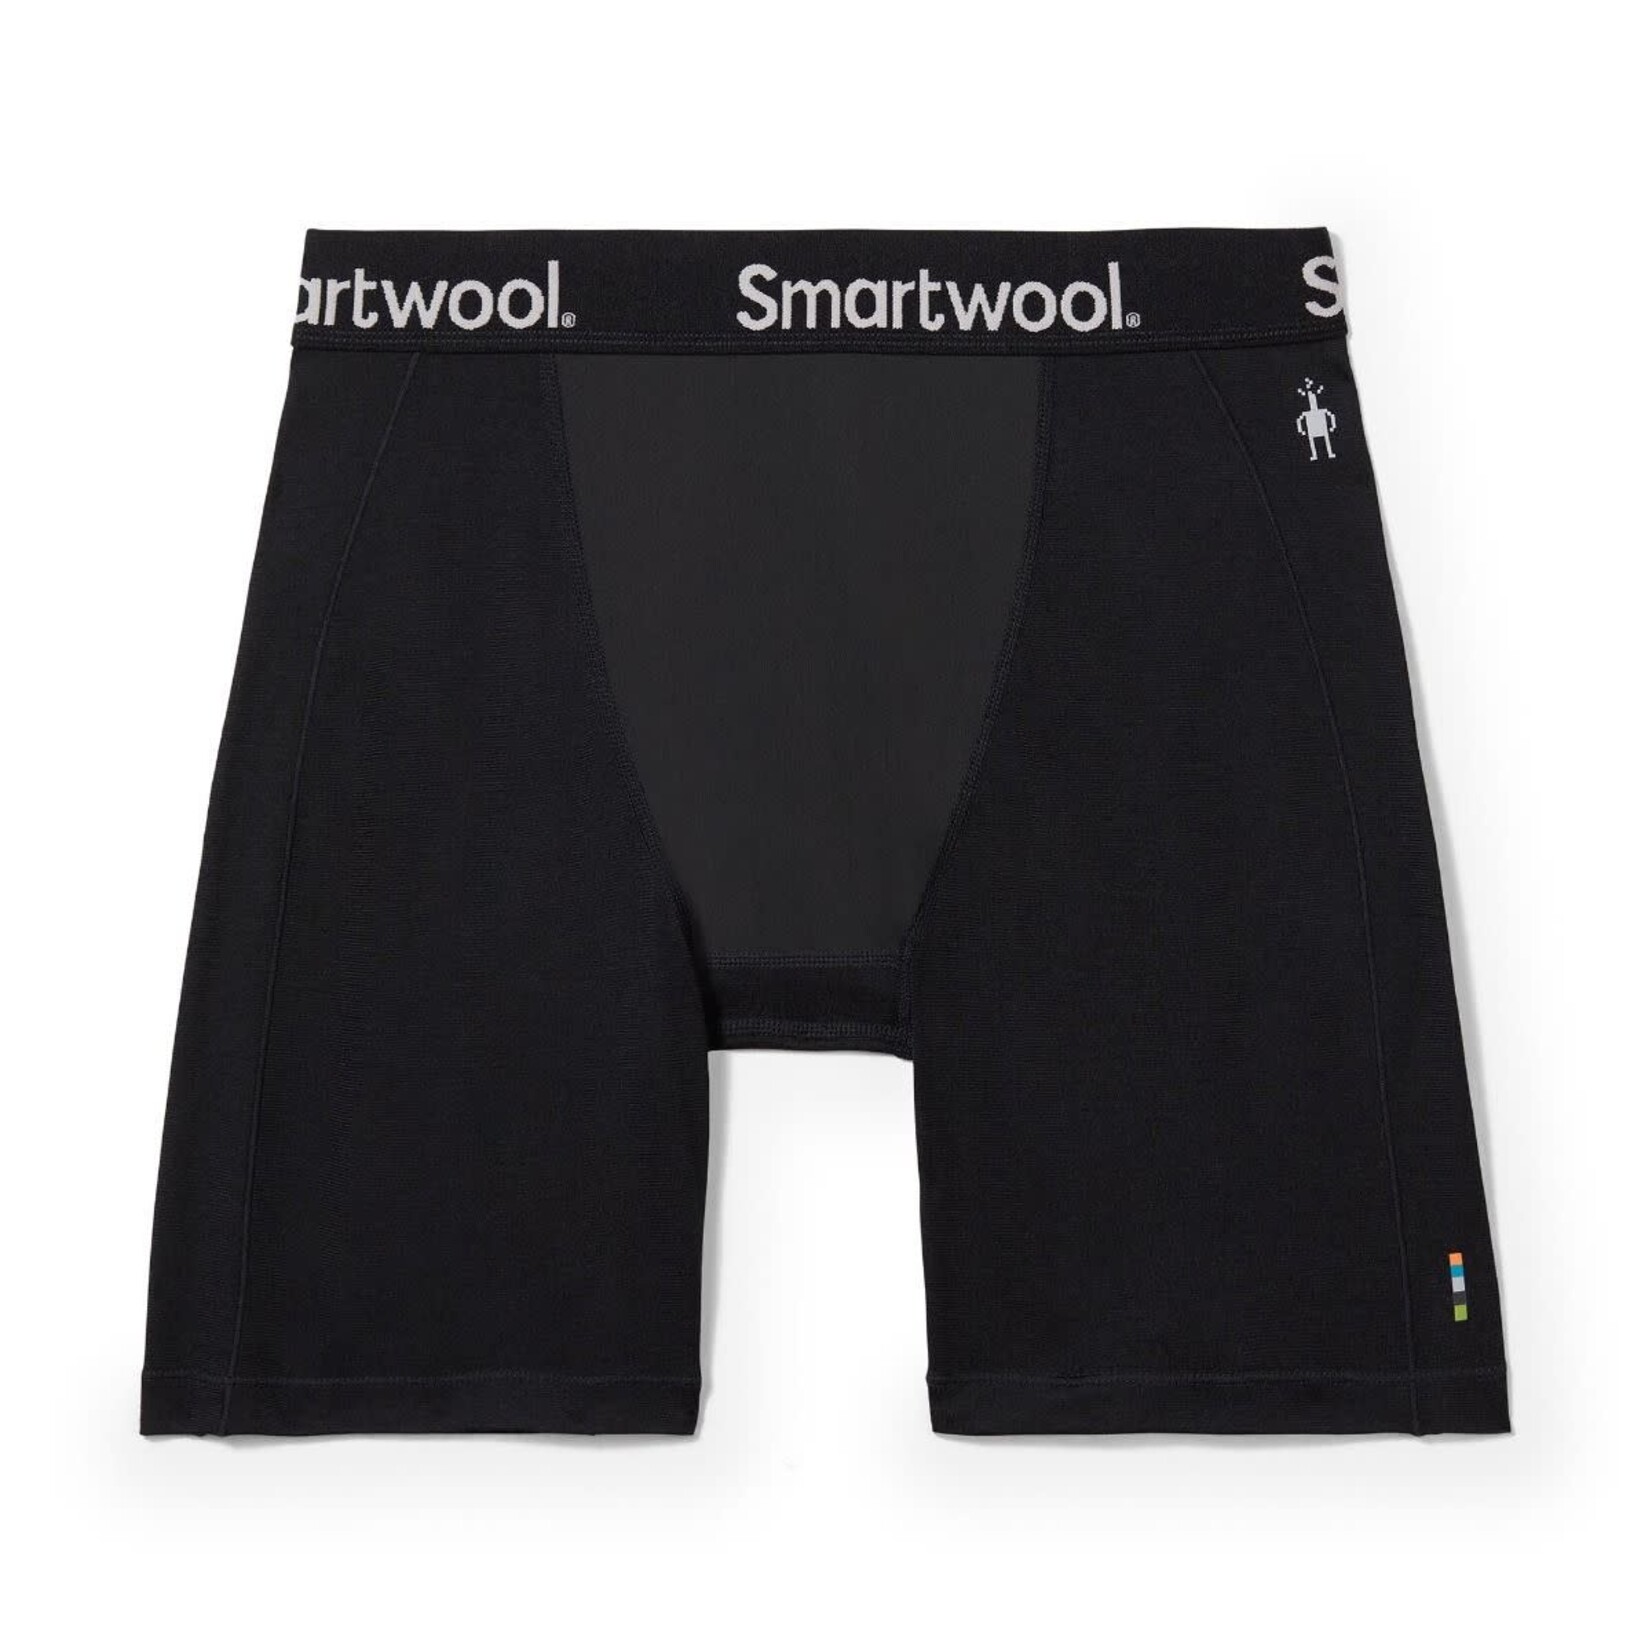 Smartwool Smartwool Wind Boxer Brief M